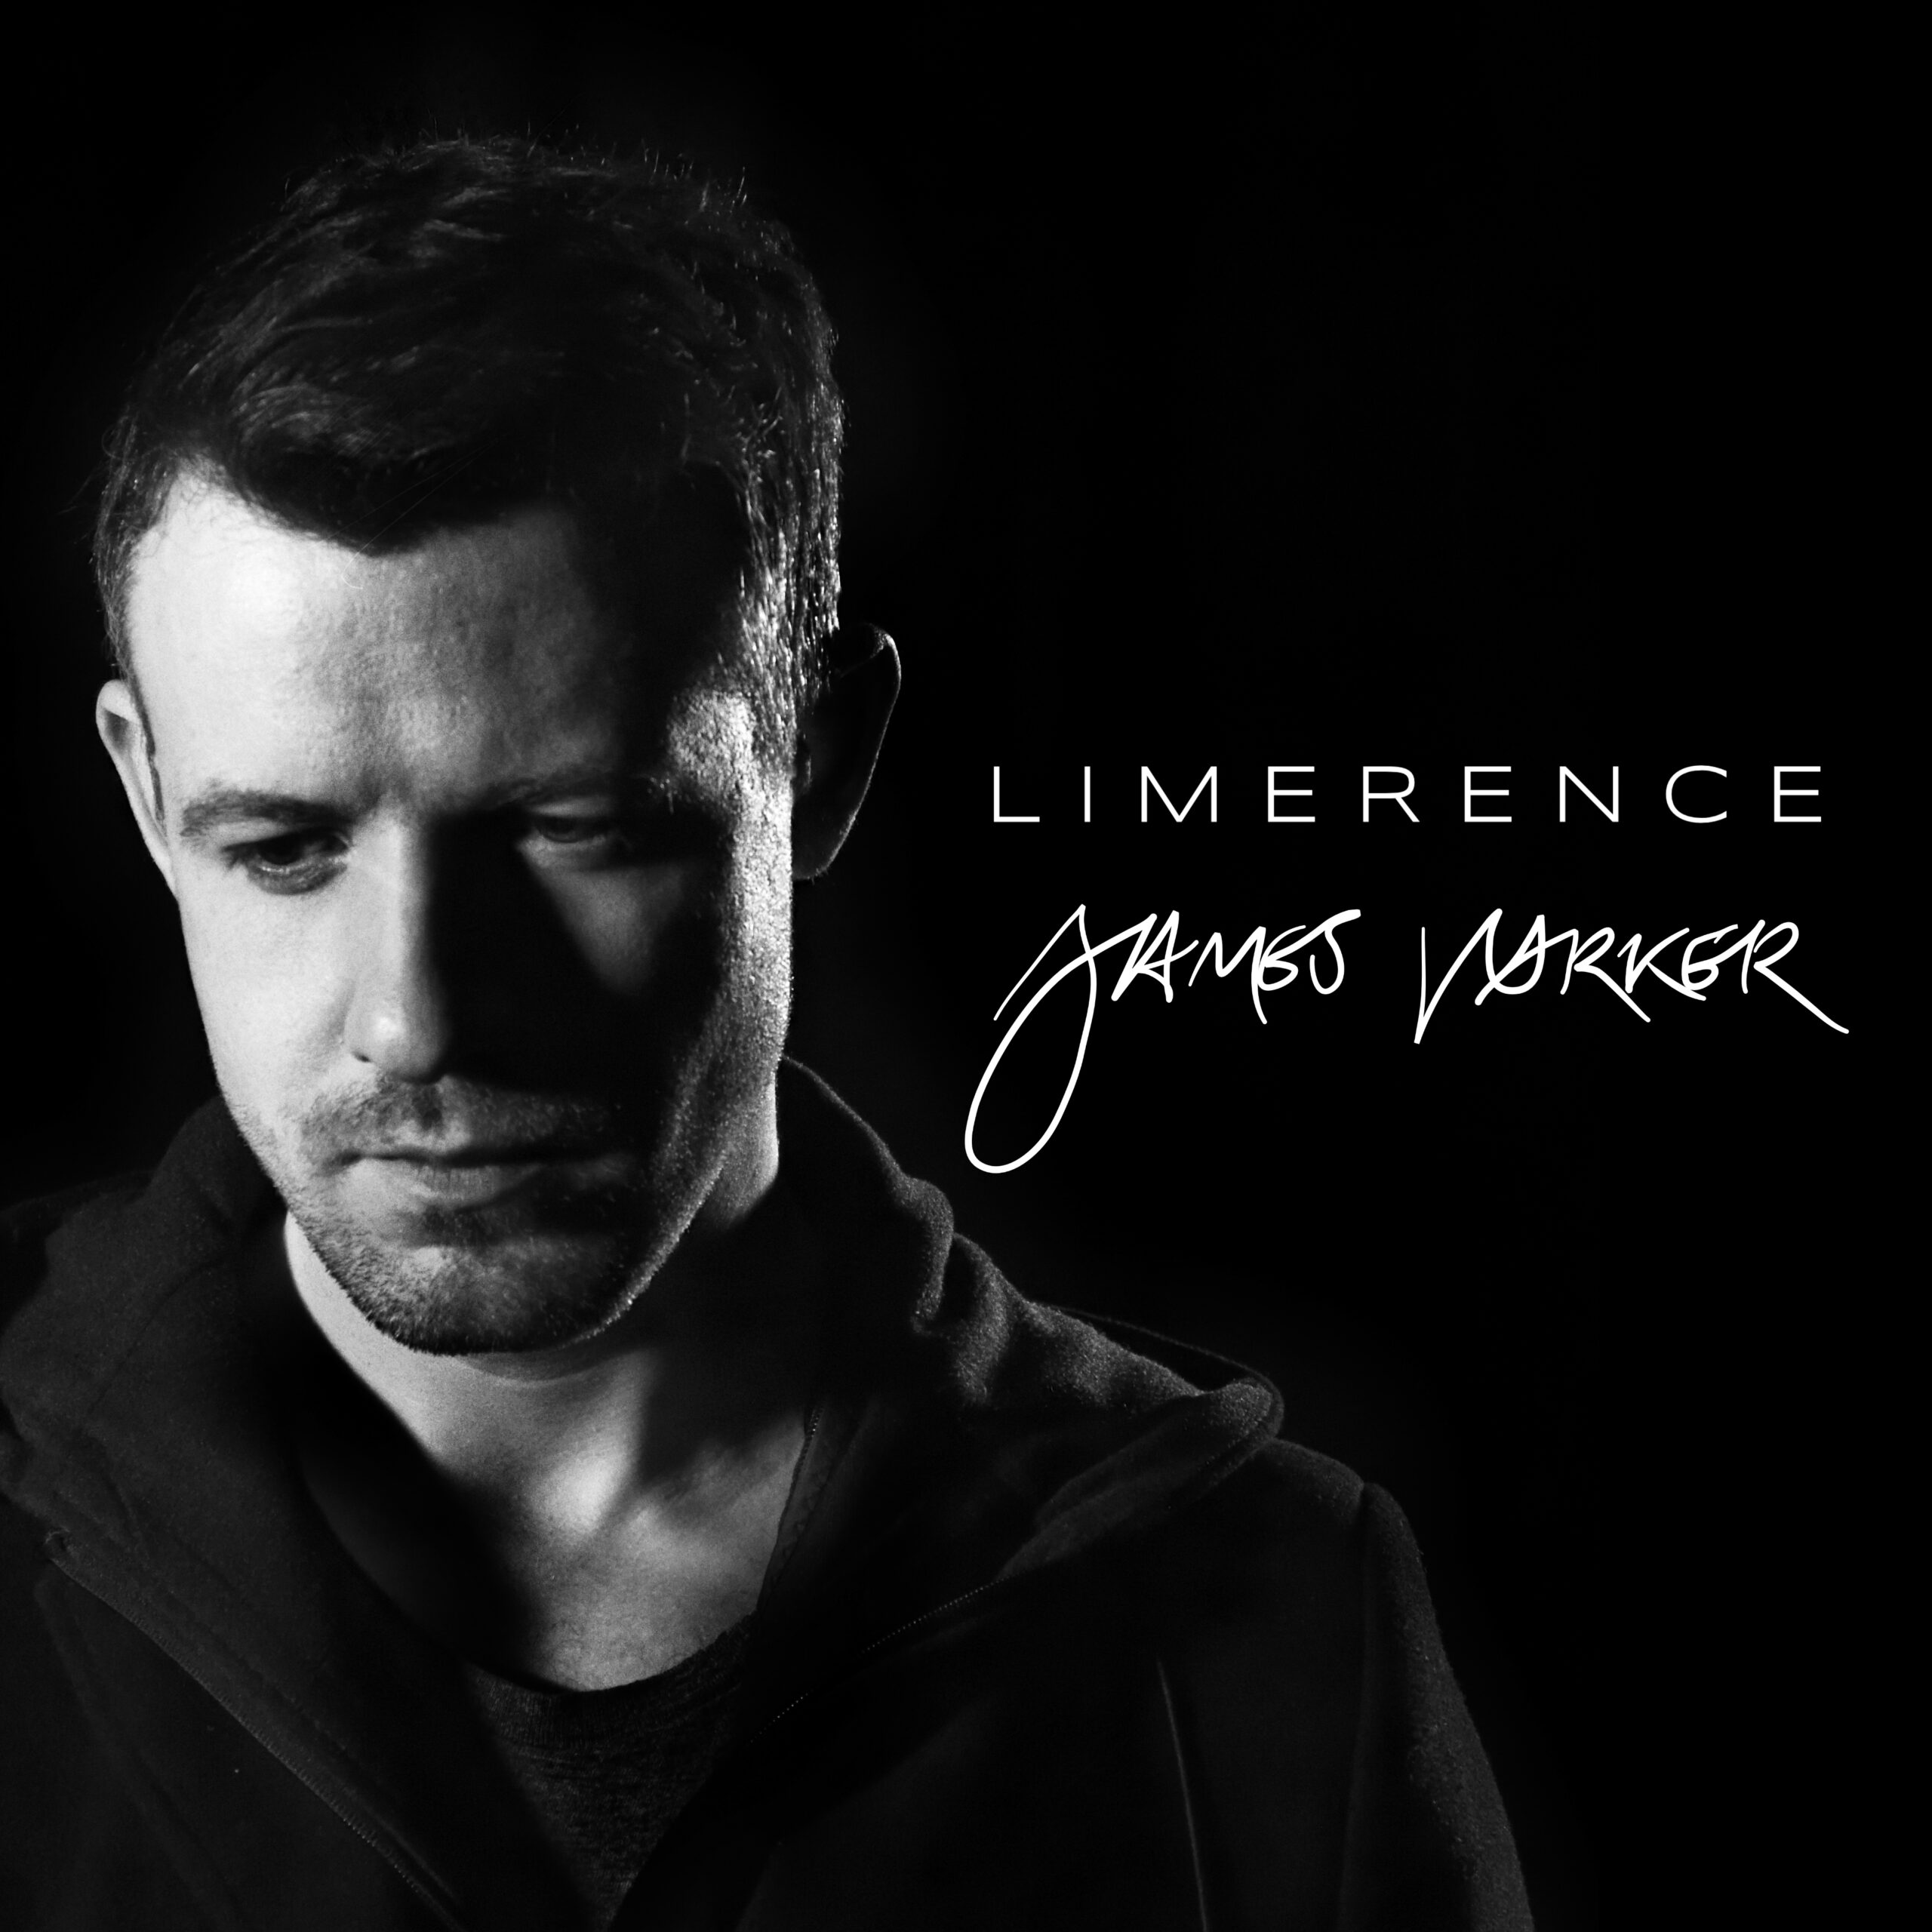 'Limerence' by James Harker